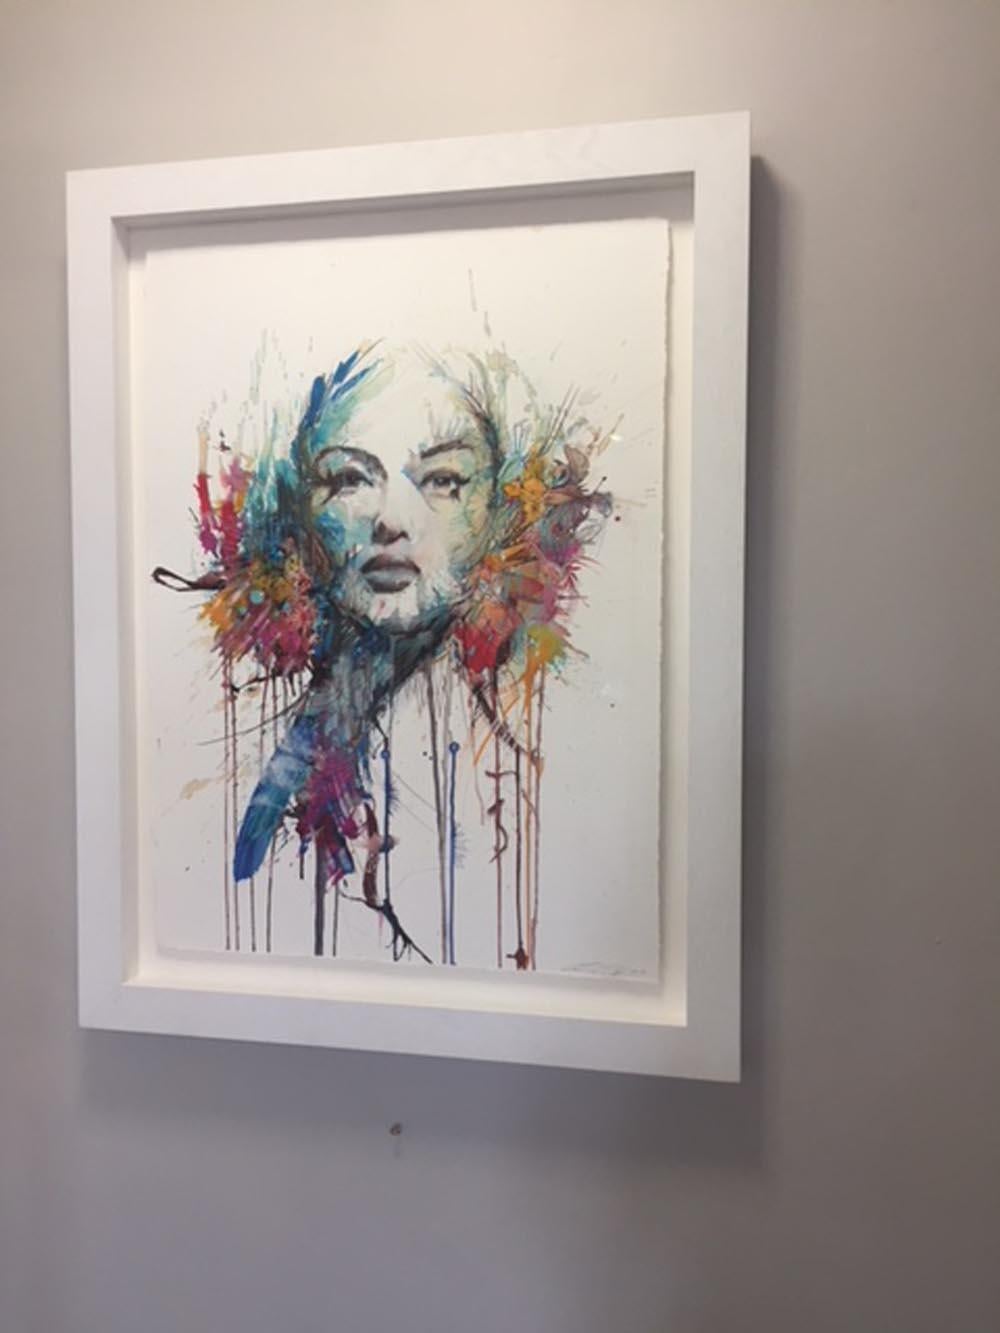 The Butterfly Effect - Original Painting on paper - Gray Portrait Painting by Carne Griffiths